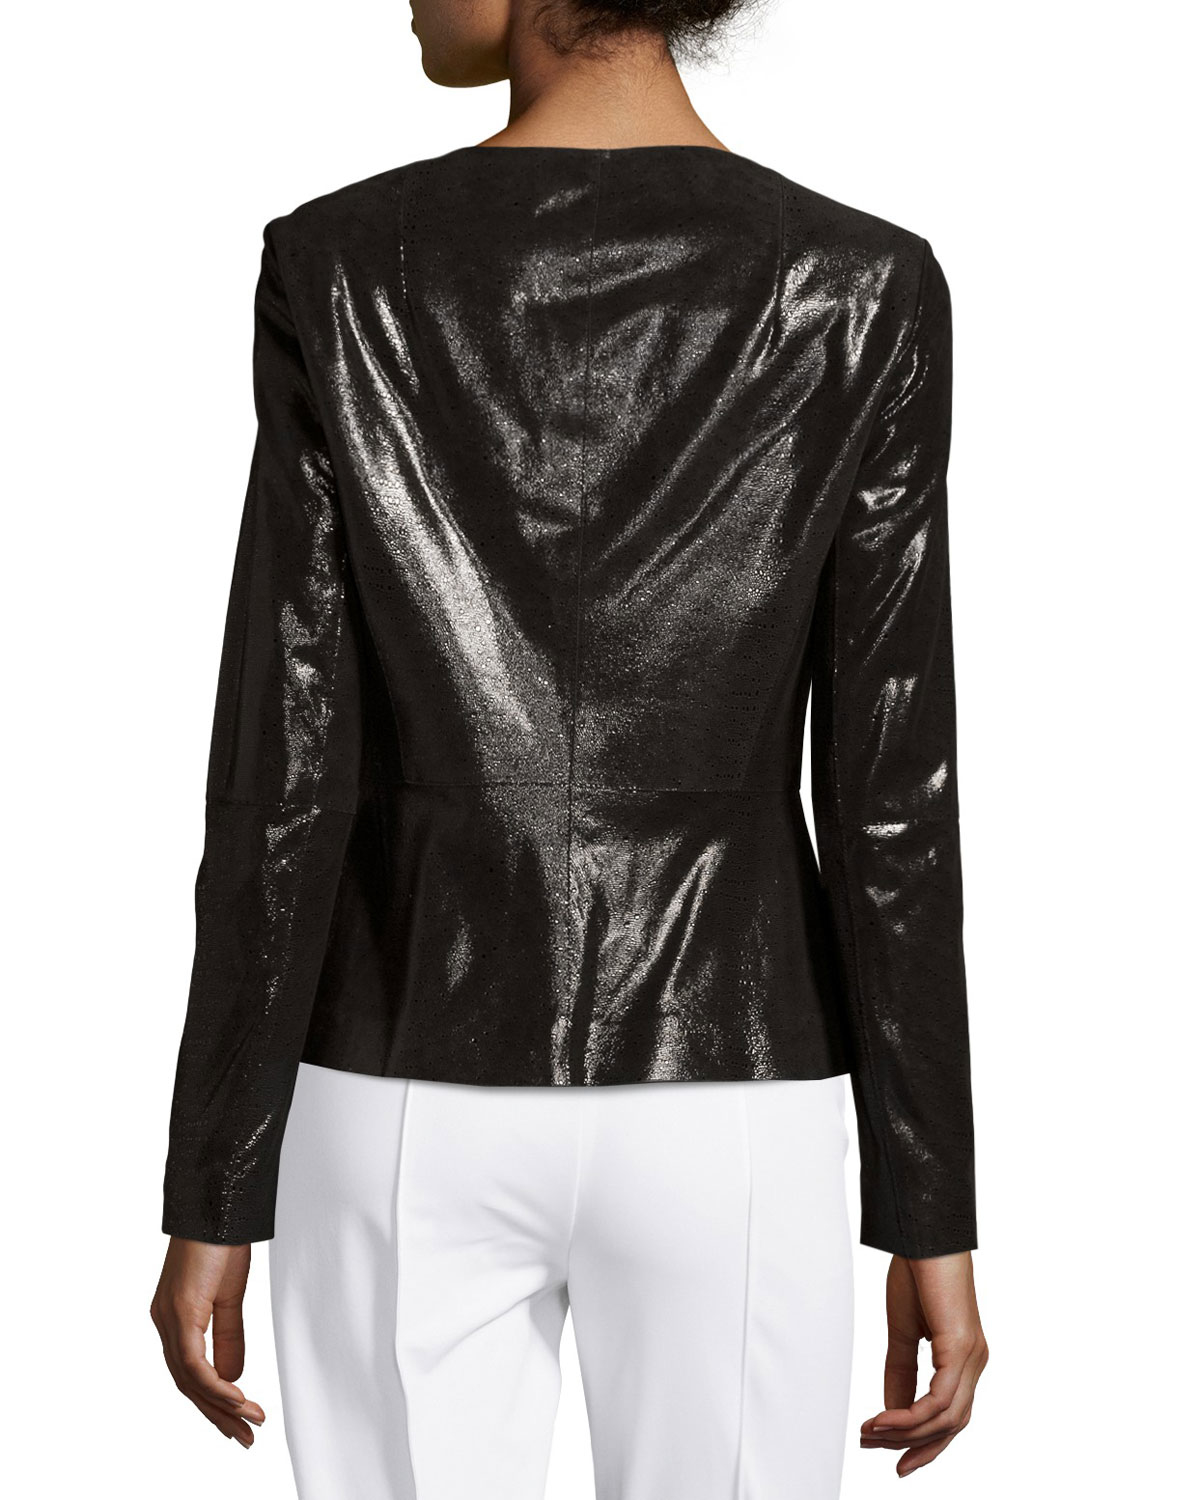 Lafayette 148 New York Liv Patent Leather Jacket in Black - Lyst